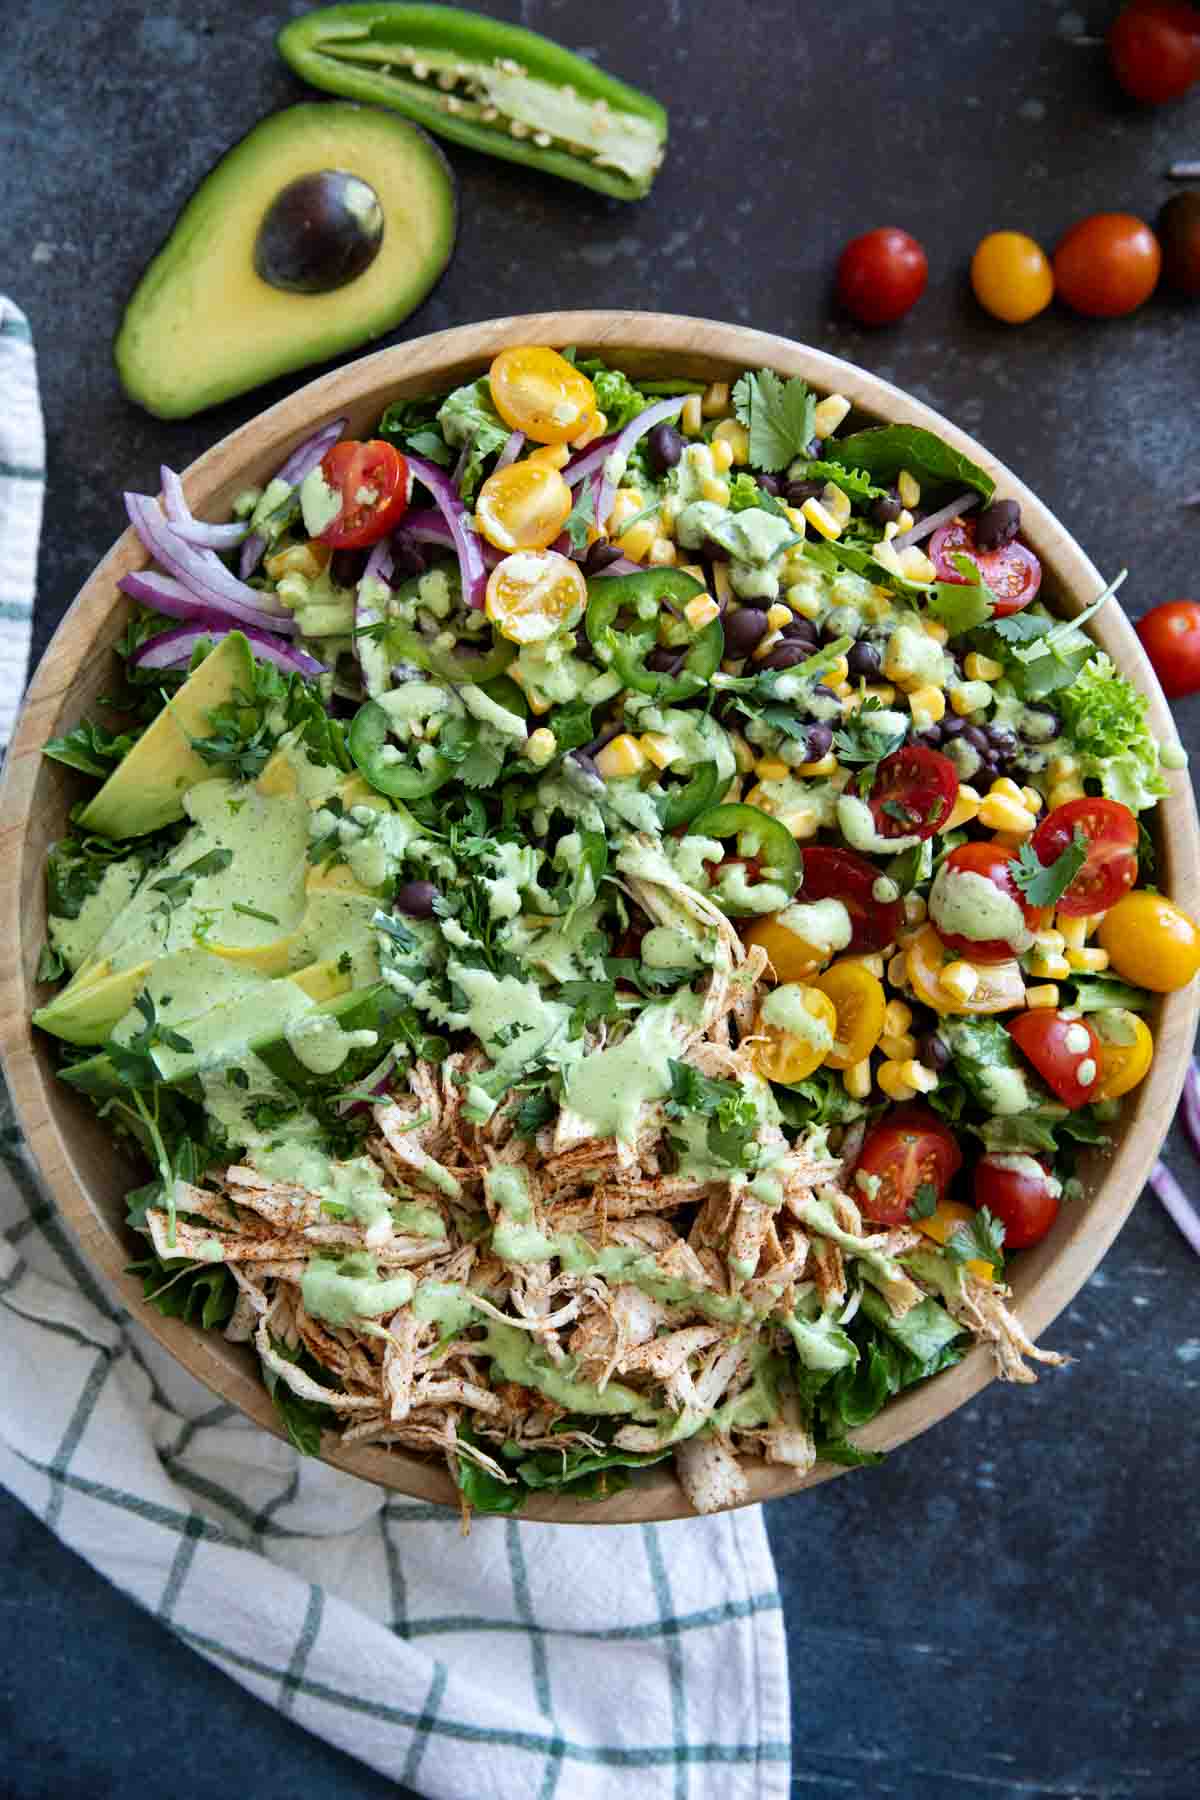 Southwest chicken salad with tomatoes, corn, black beans, onions, and shredded chicken.